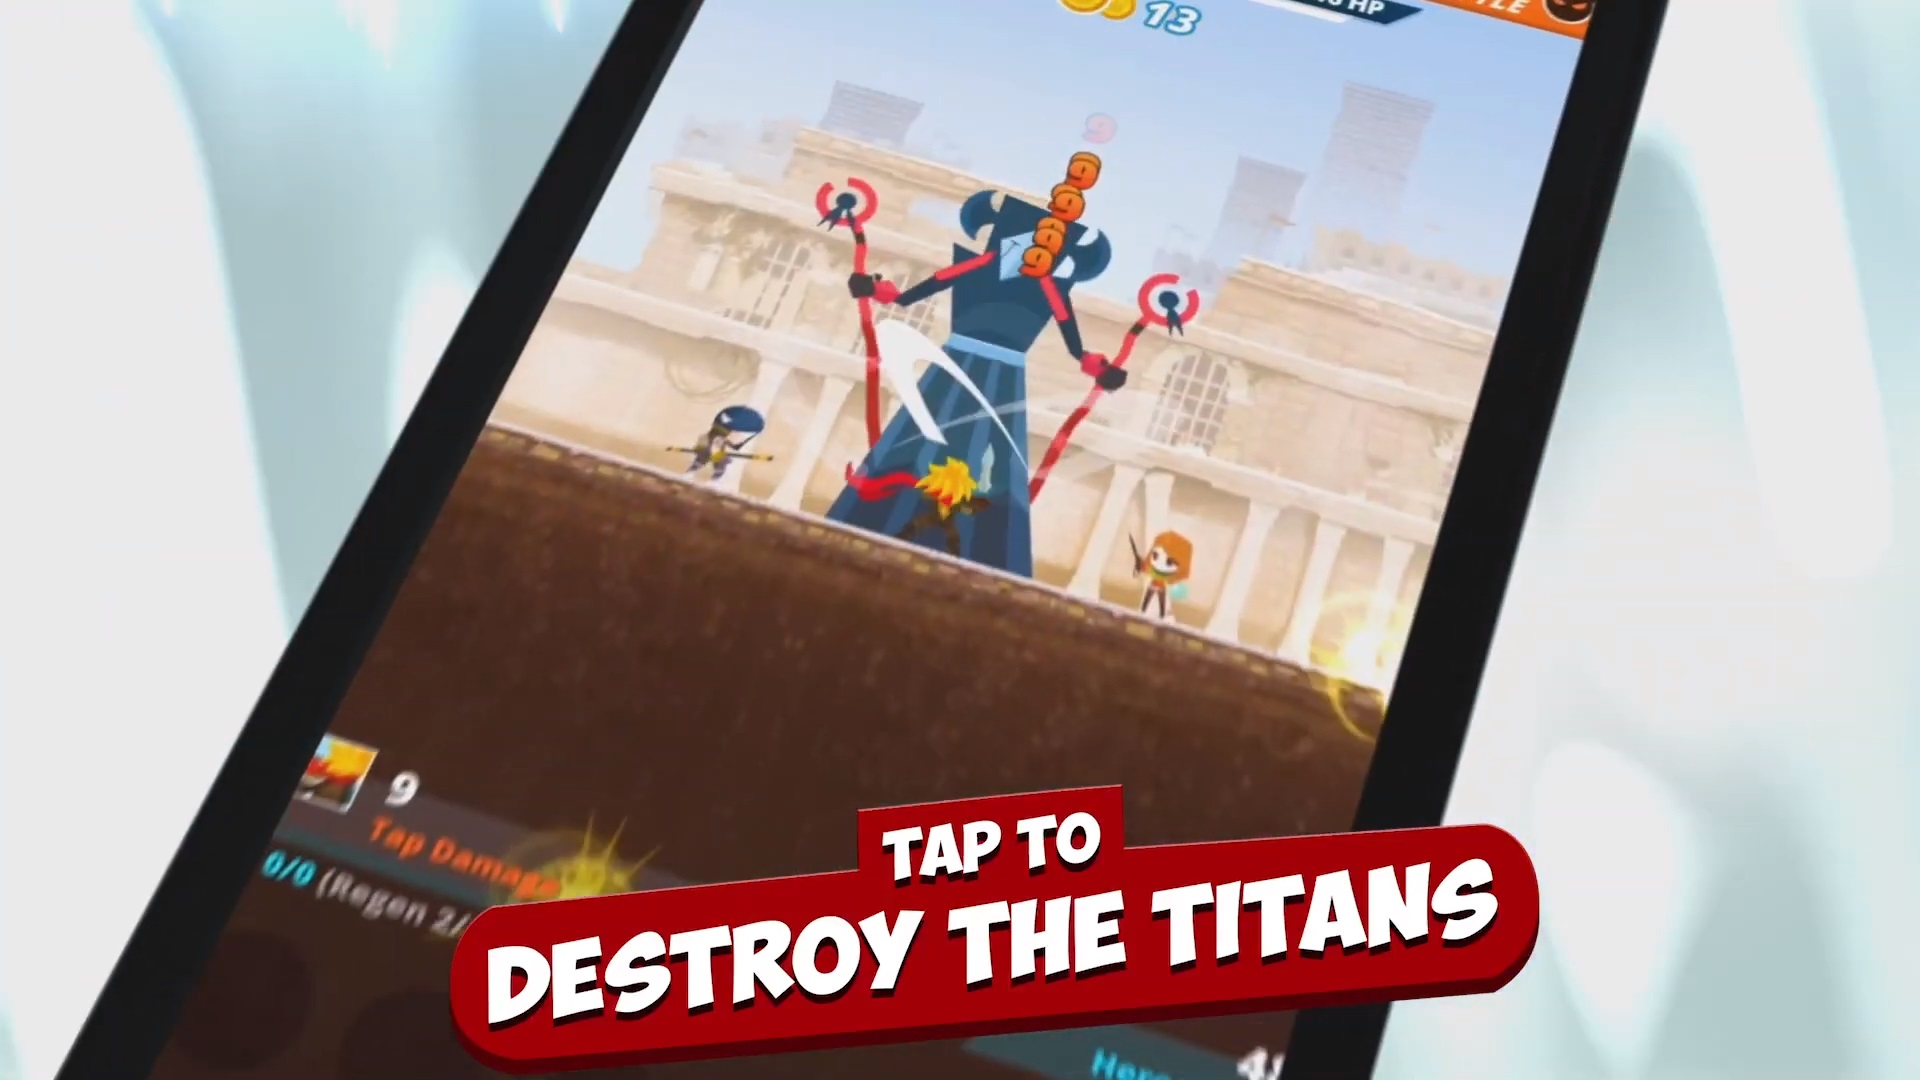 Best idle games: Tap Titans 2. Image shows to small figures attack a larger one on a mobile screen, with text reading "Tap to destroy the titans" overlaid in front.